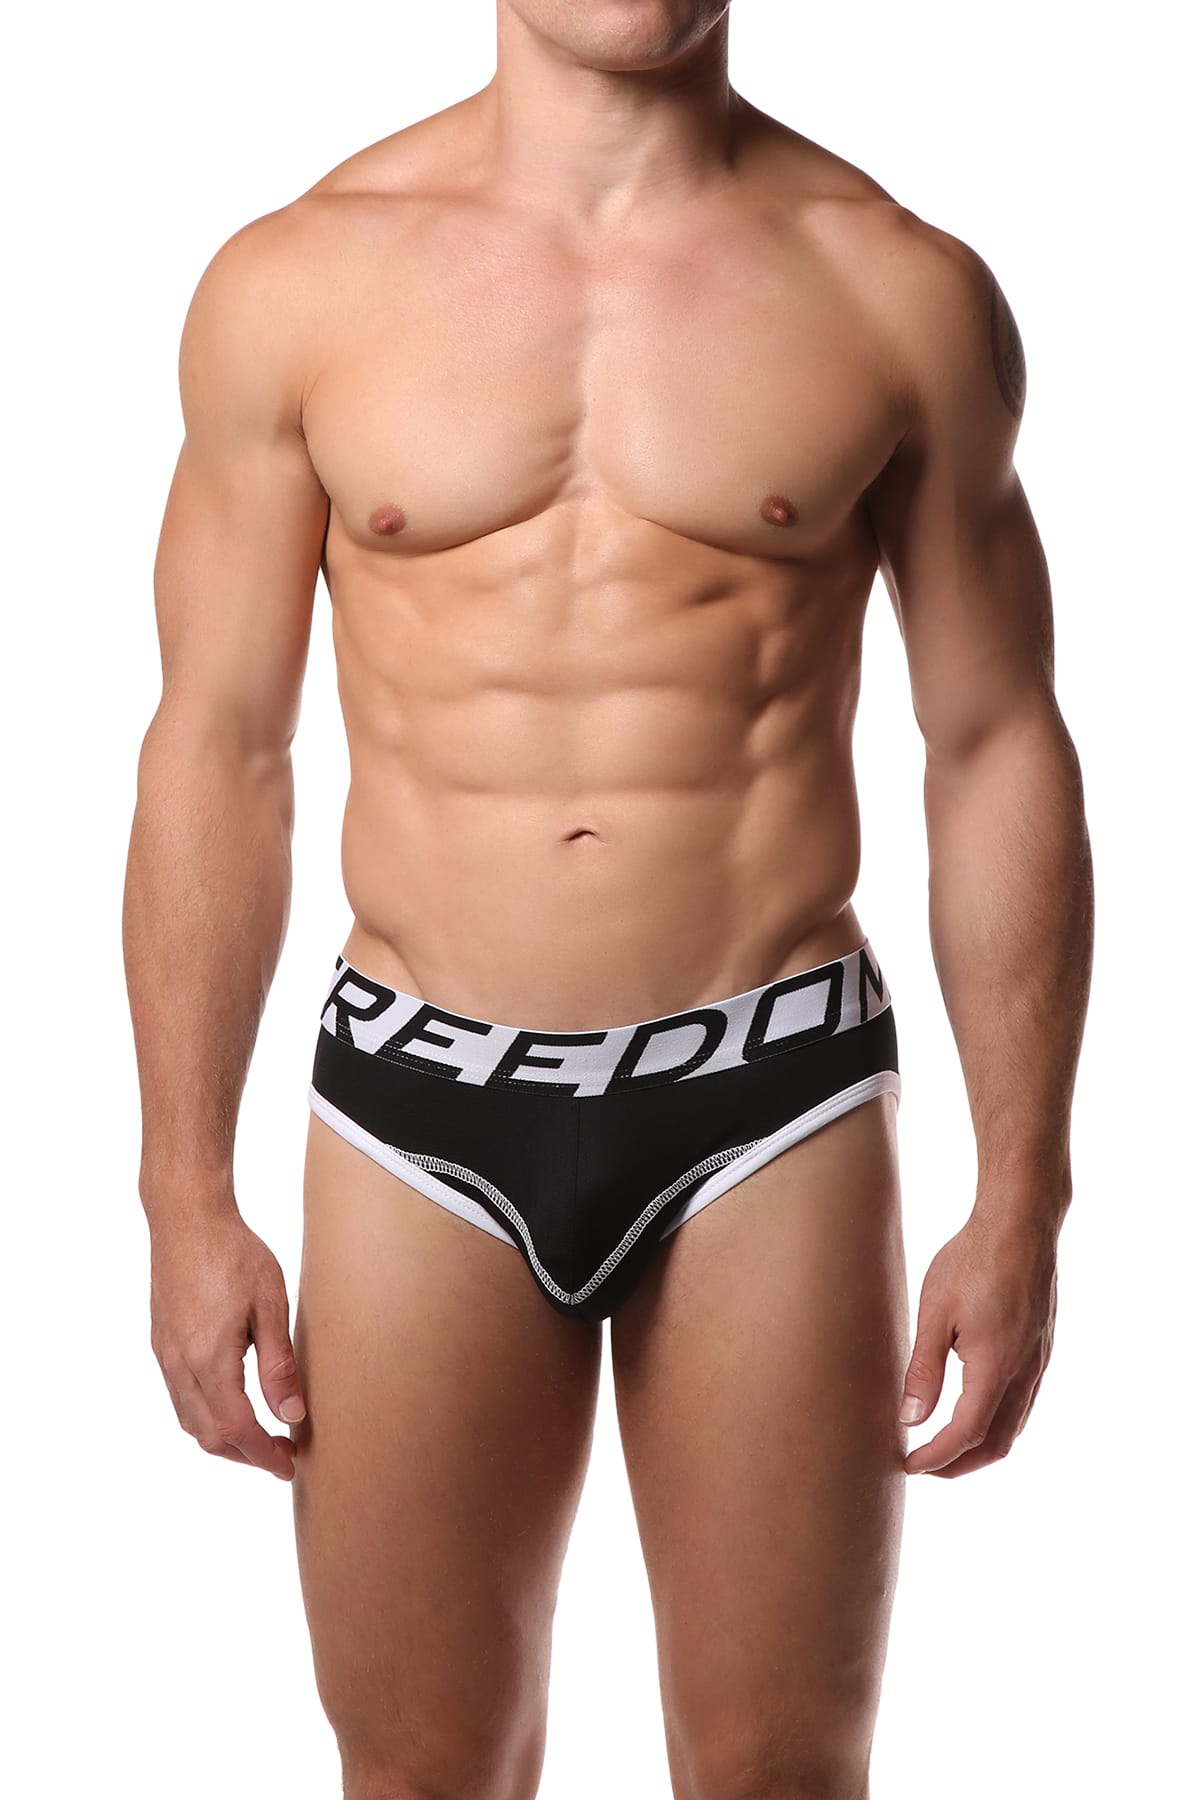 Freedom Reigns Black & White Contrast Brief